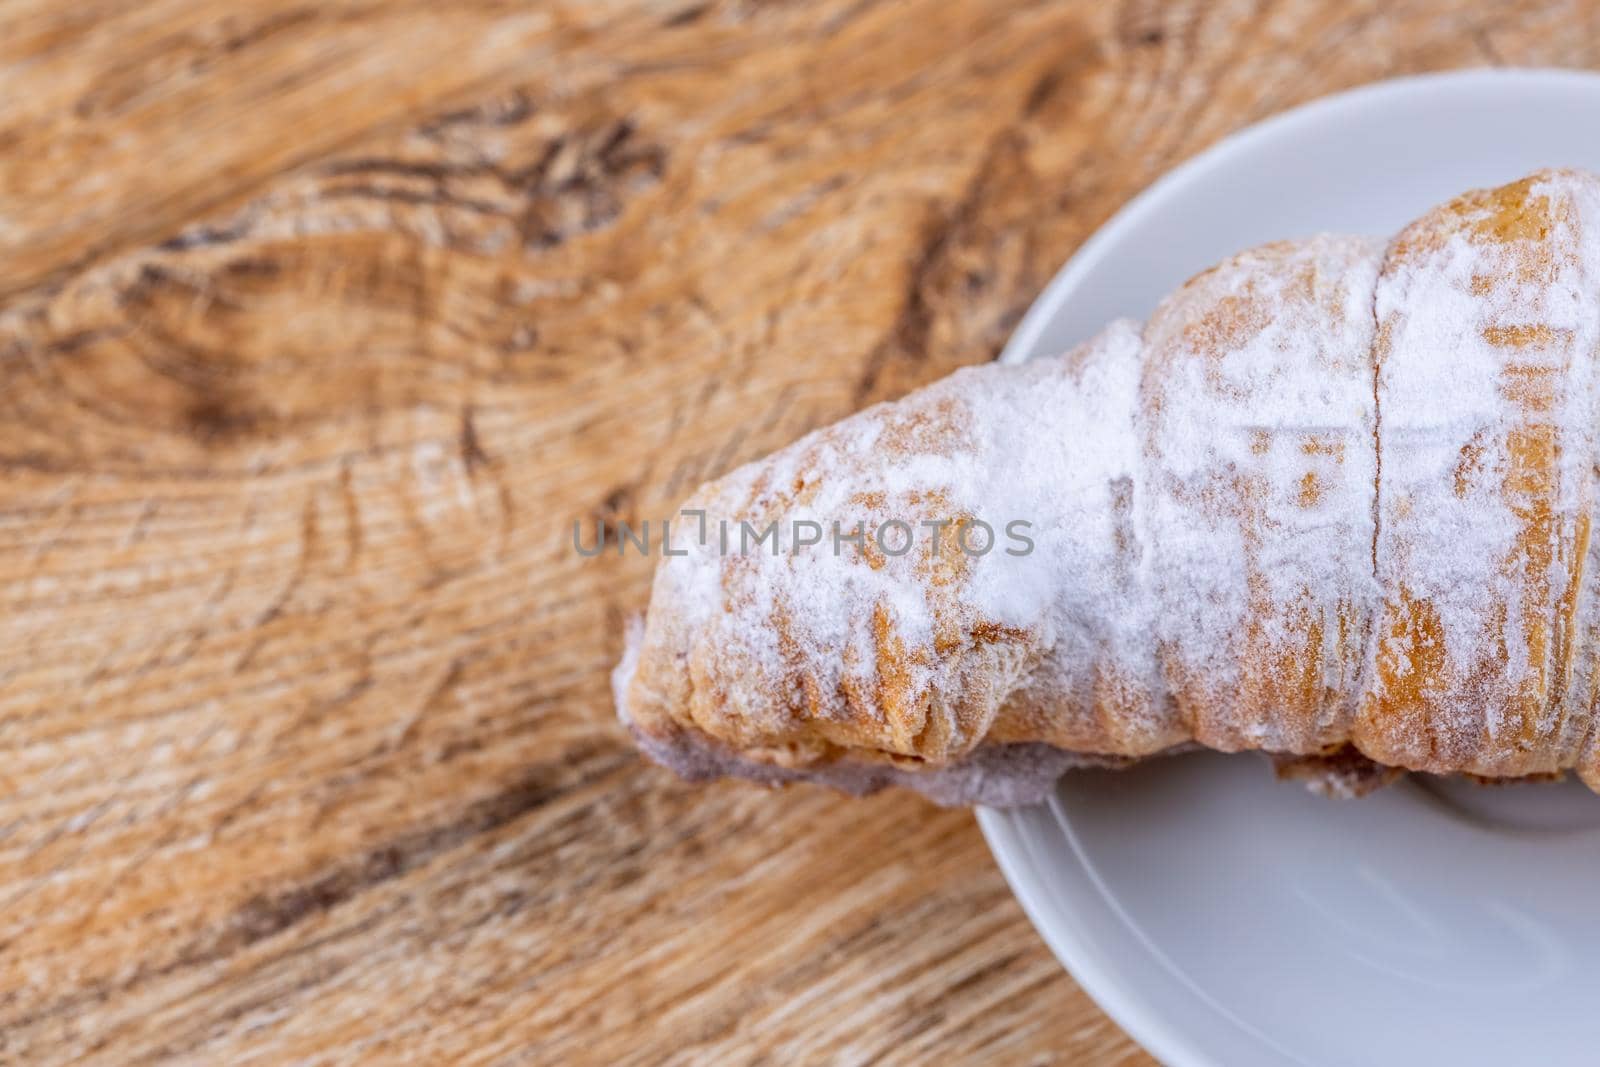 Delicious fragrant puff pastry cone with protein cream or whipped cream on white plate on wooden table